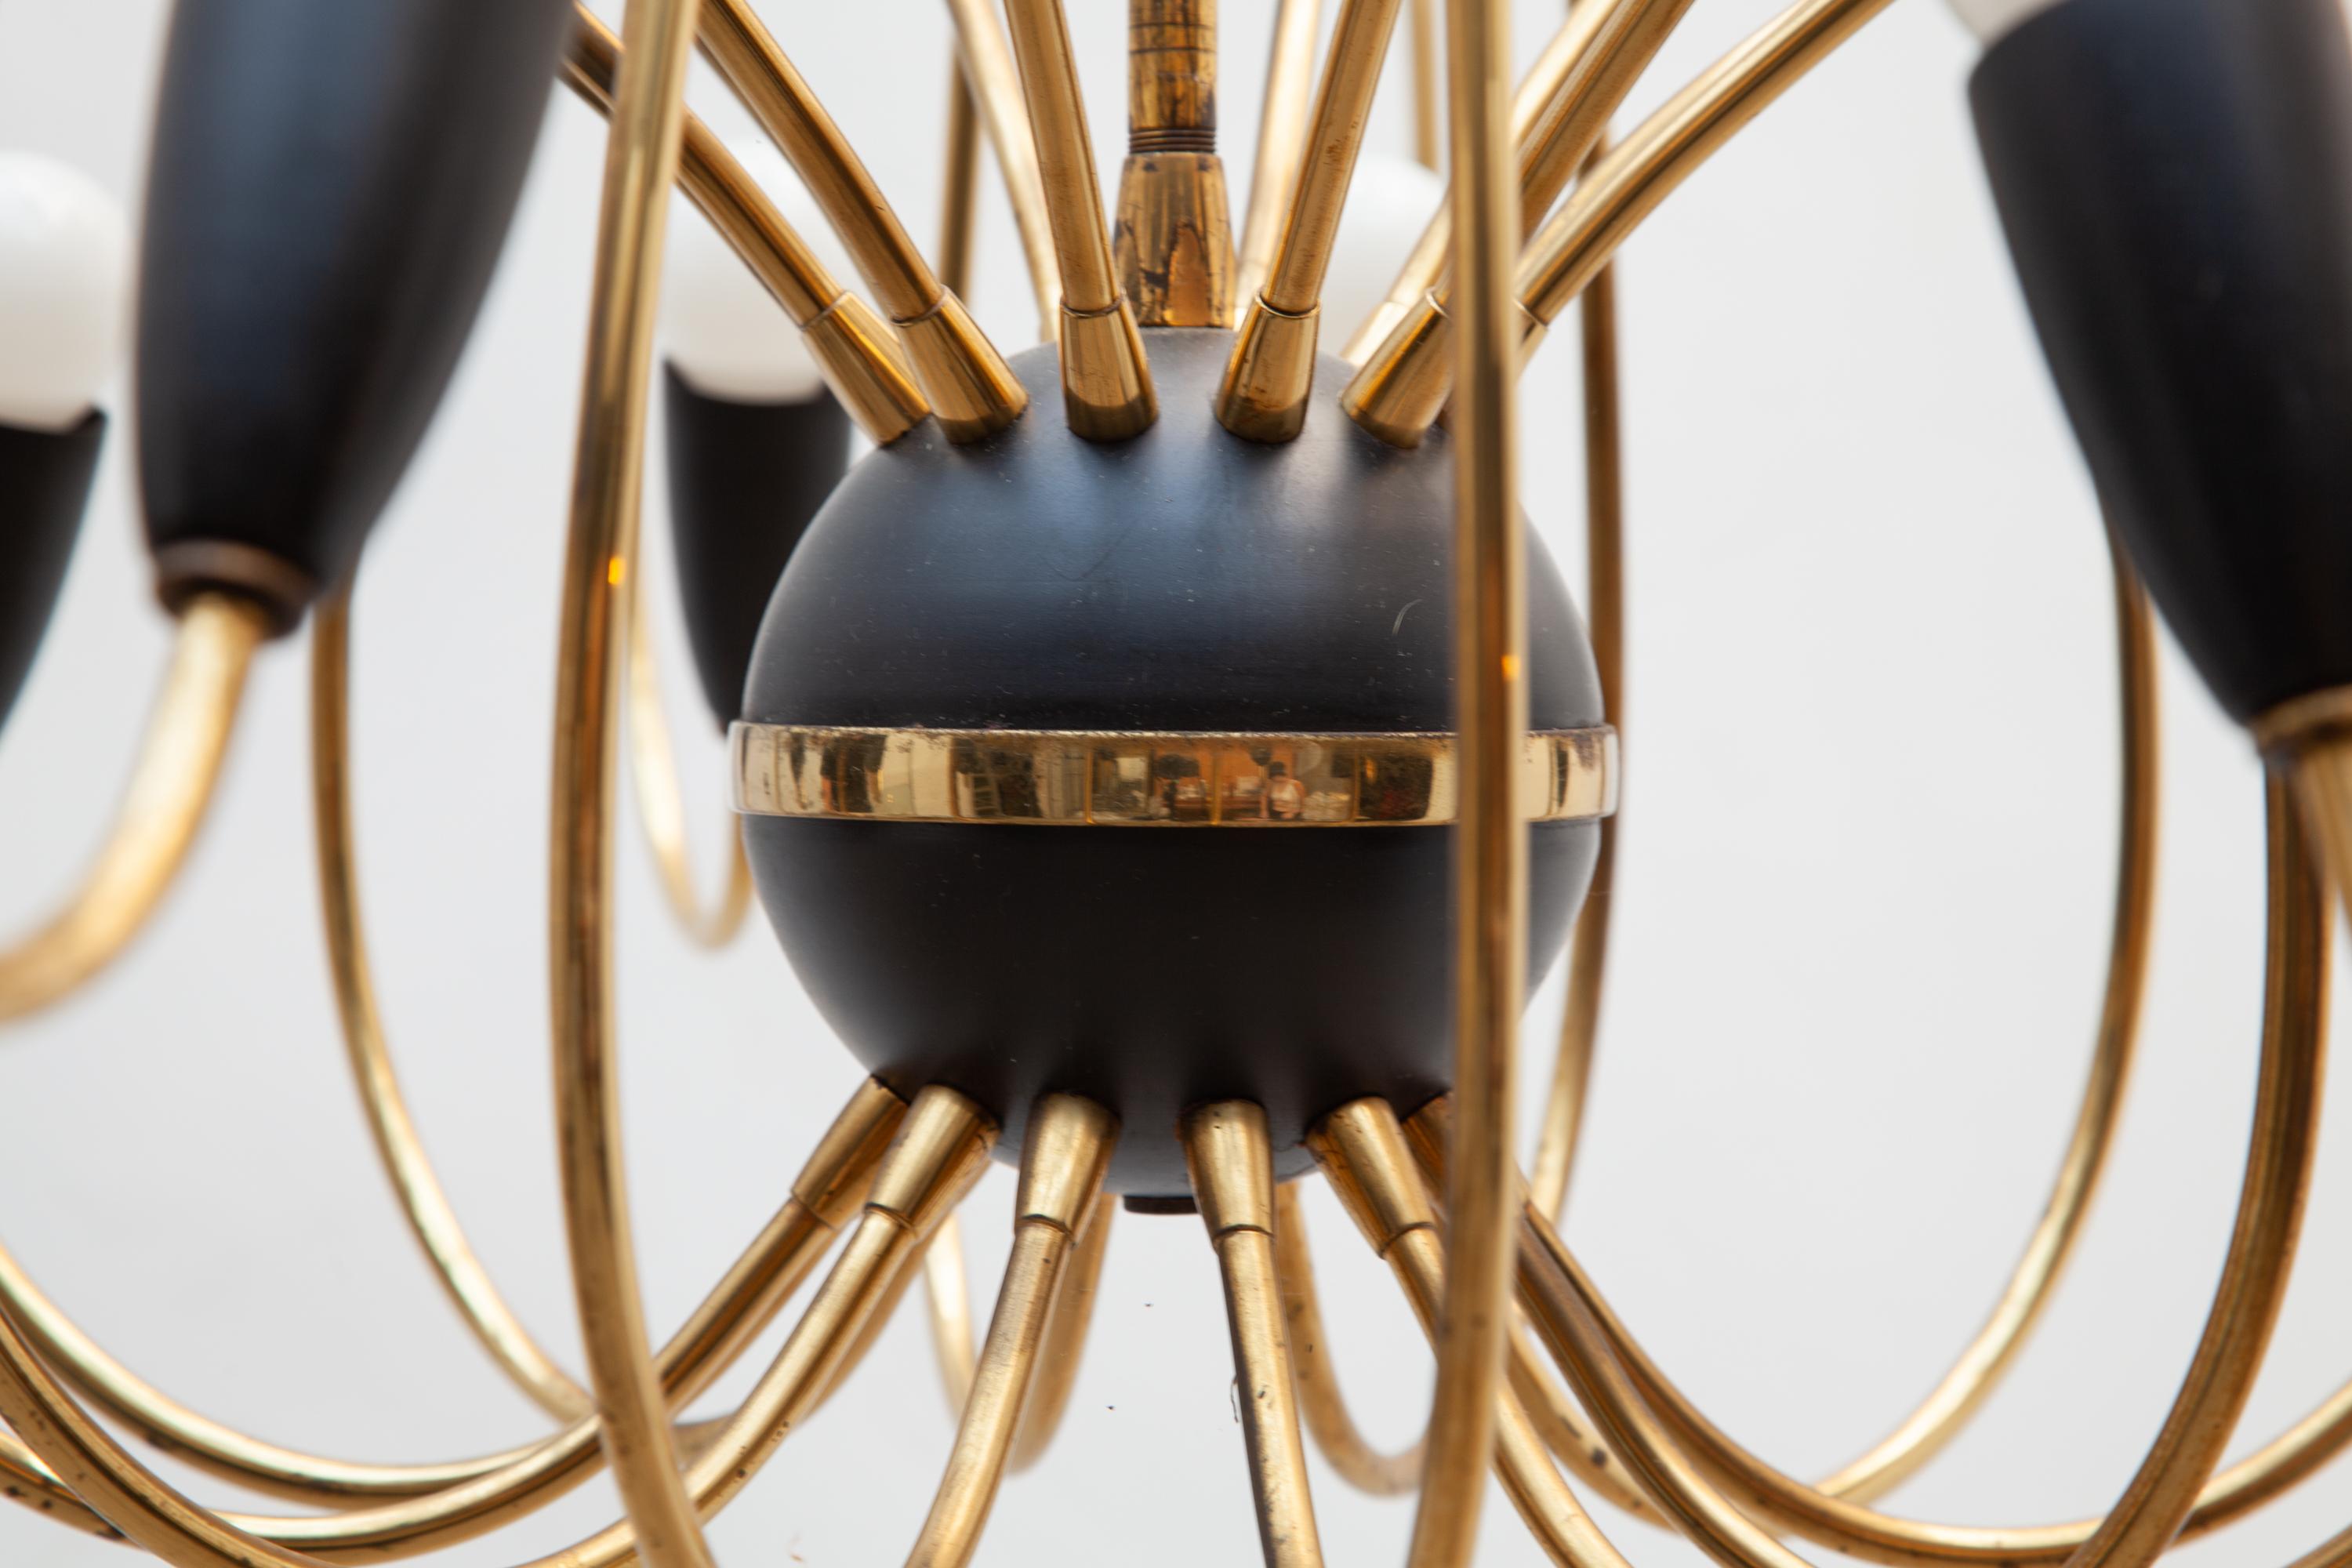 Vintage Mid-Century Modernist sputnik chandelier with twenty-four arms in the style of Stilnovo.
Dramatically swing curved brass with black bakelite fluted lamps connected from a black enameled central ball. Lit by 24 bulbs. 
